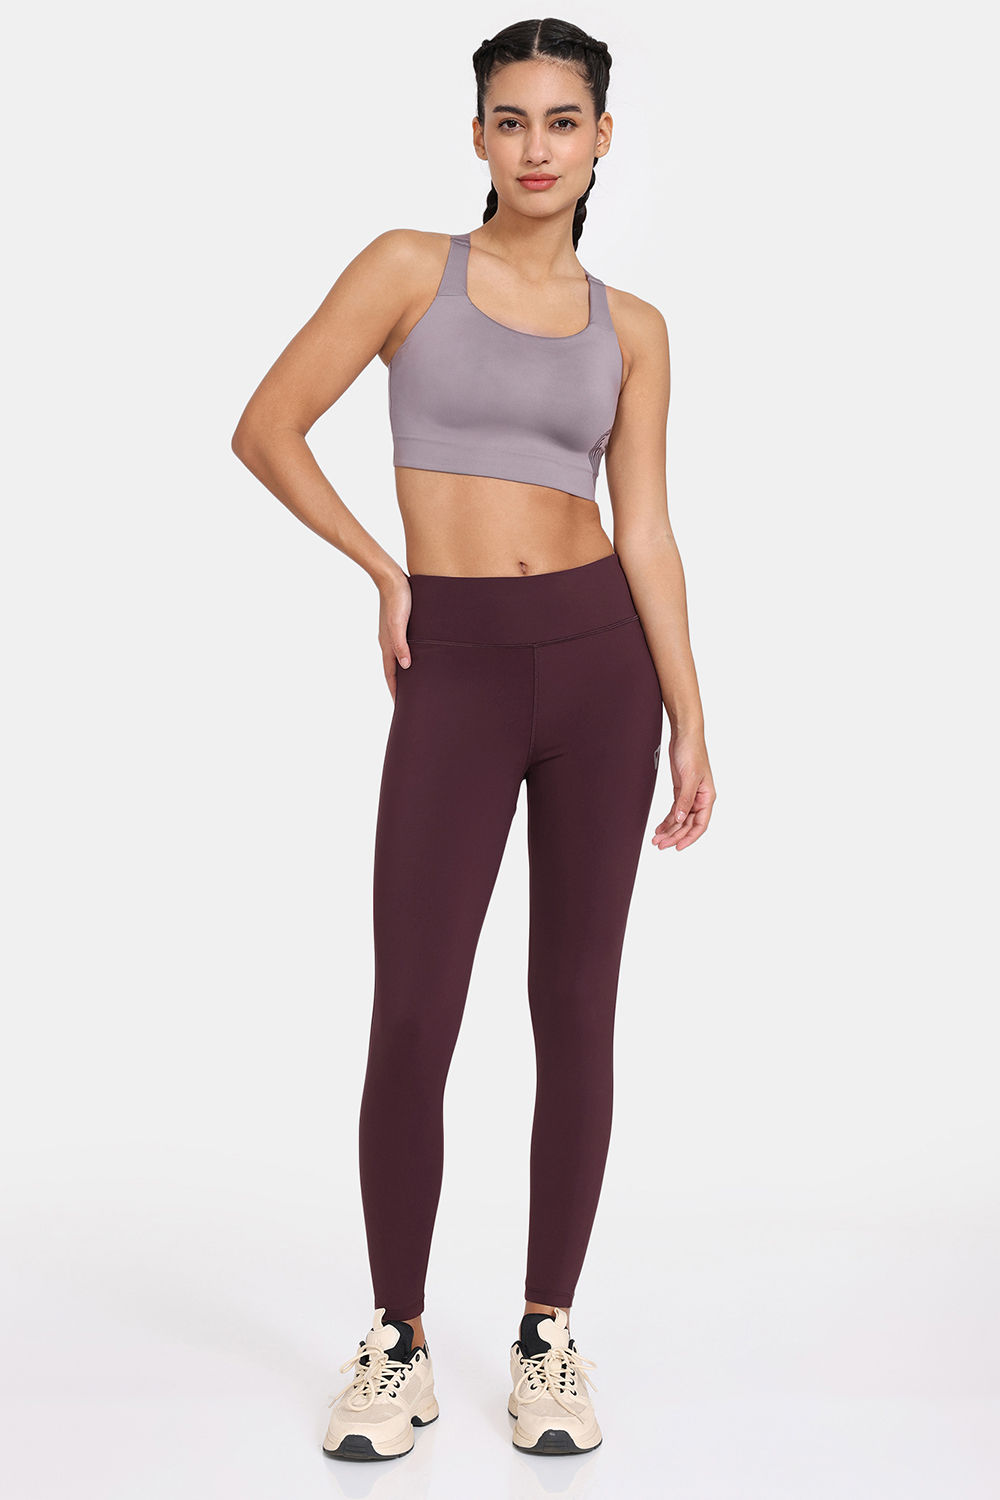 zelocity high impact quick dry sports bra with high rise leggings purple burgundy